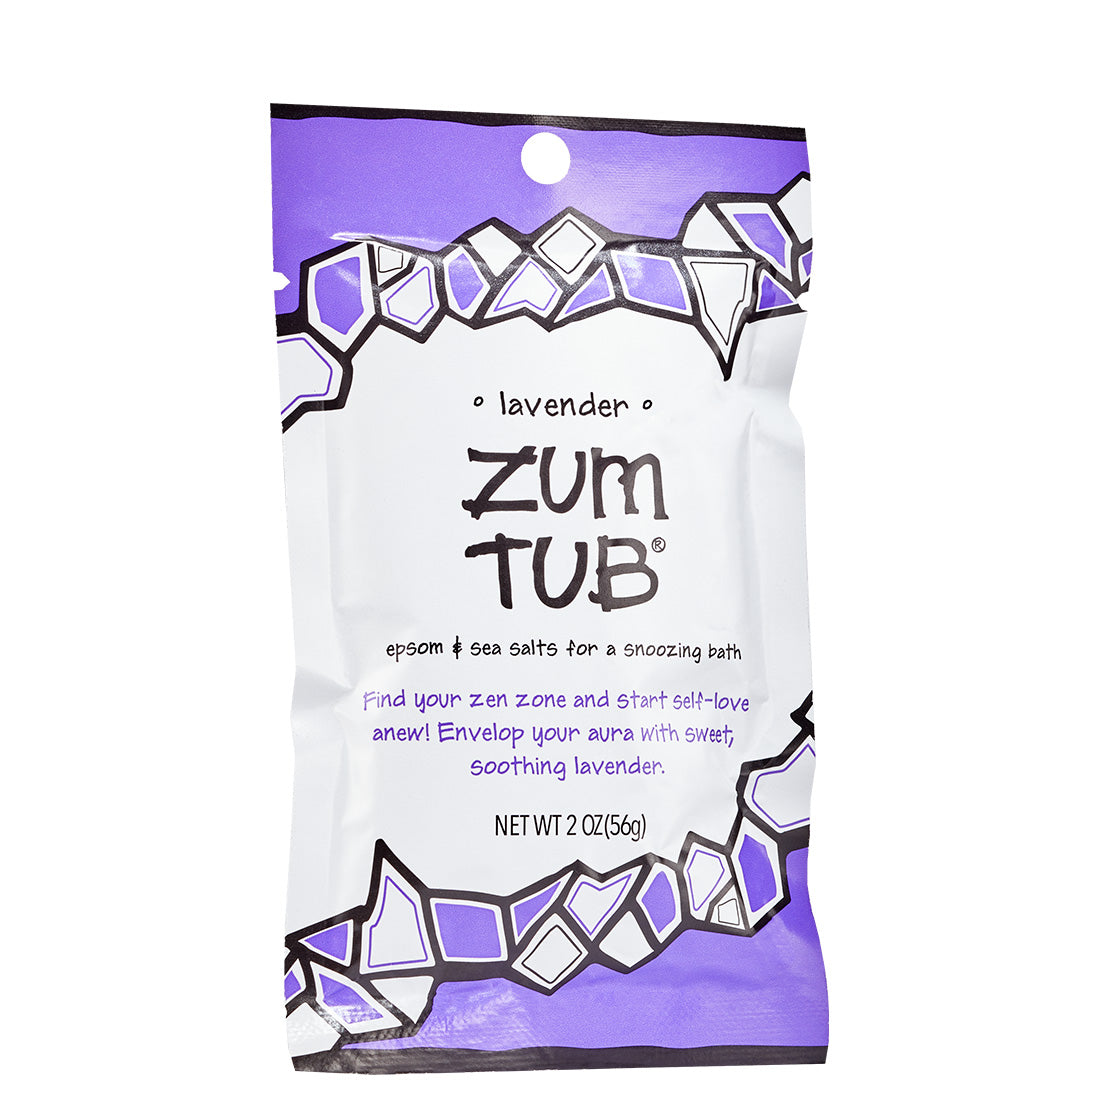 Tearable packet with purple design containing lavender scented bath salts